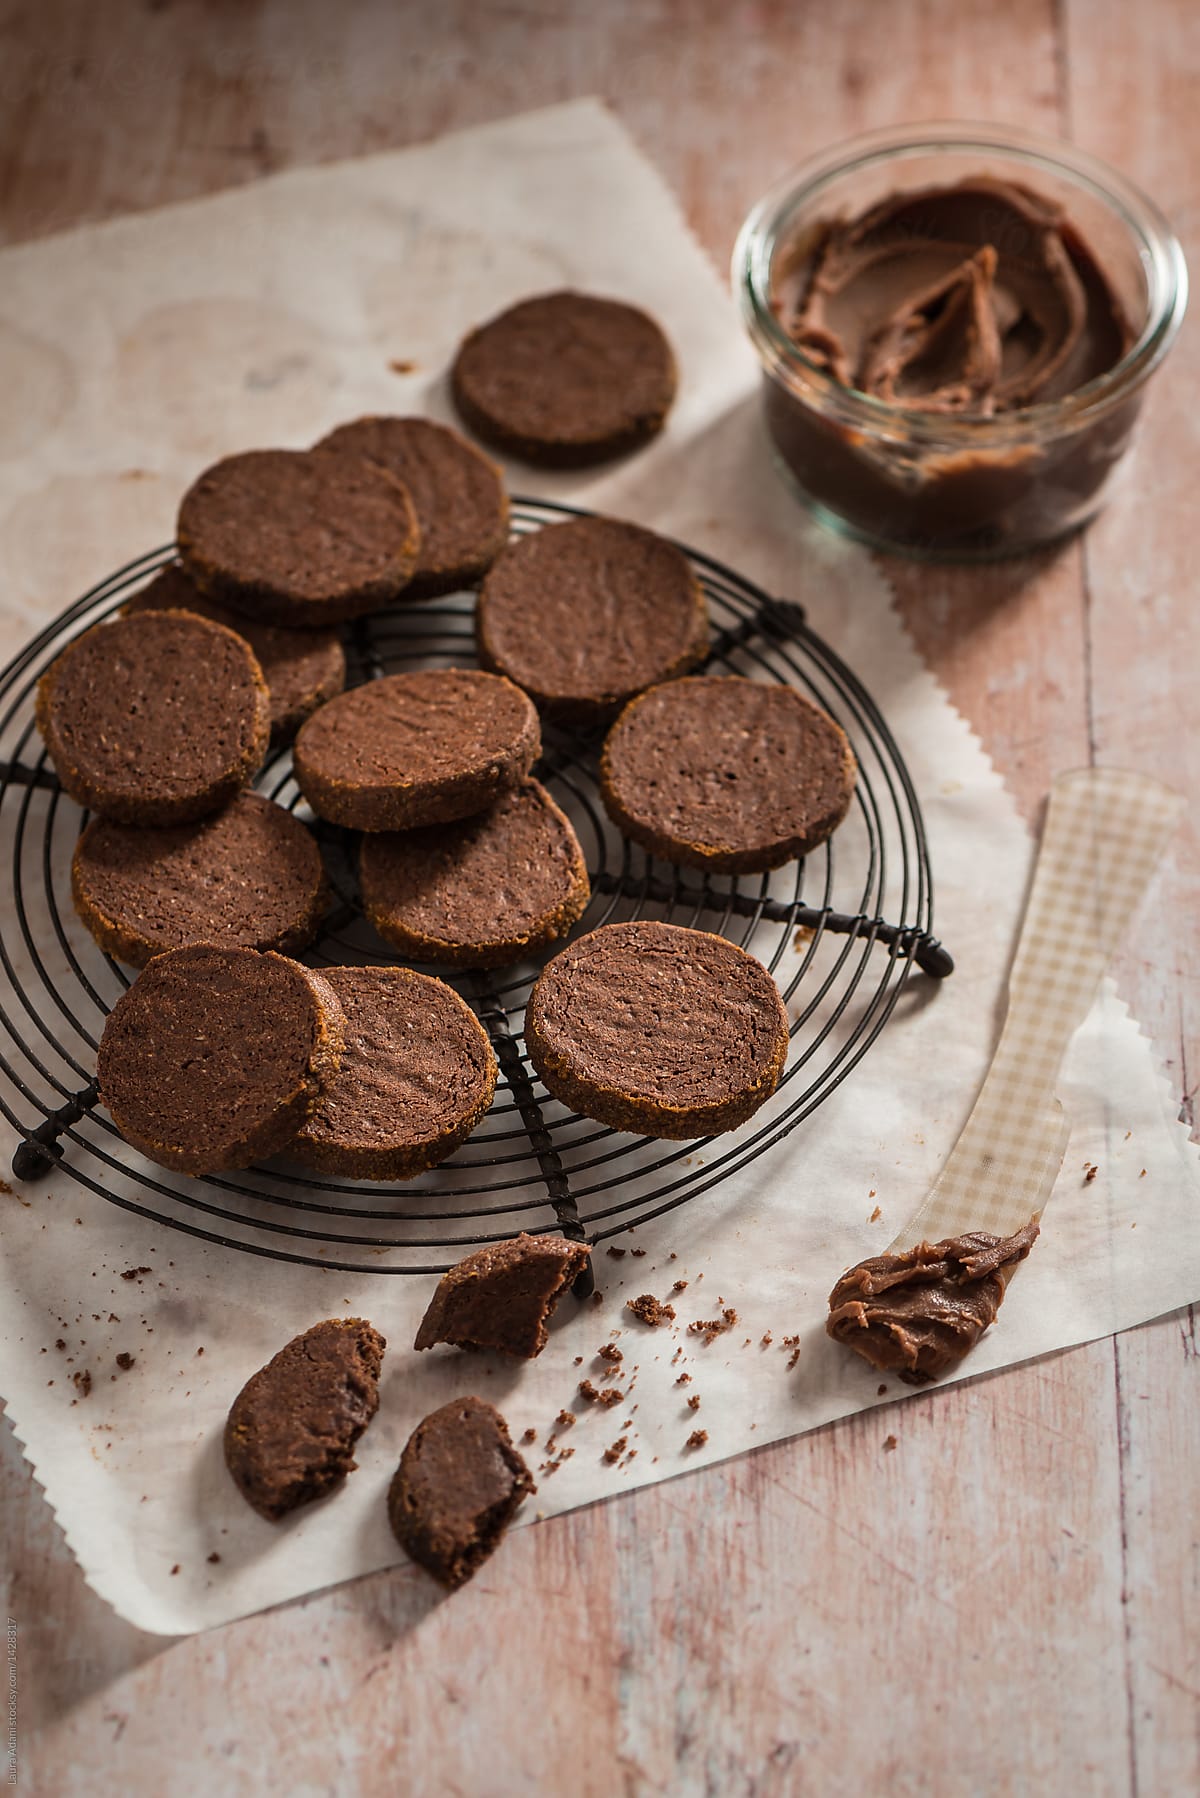 Cocoa cookies coated with chocolate salted caramel sauce